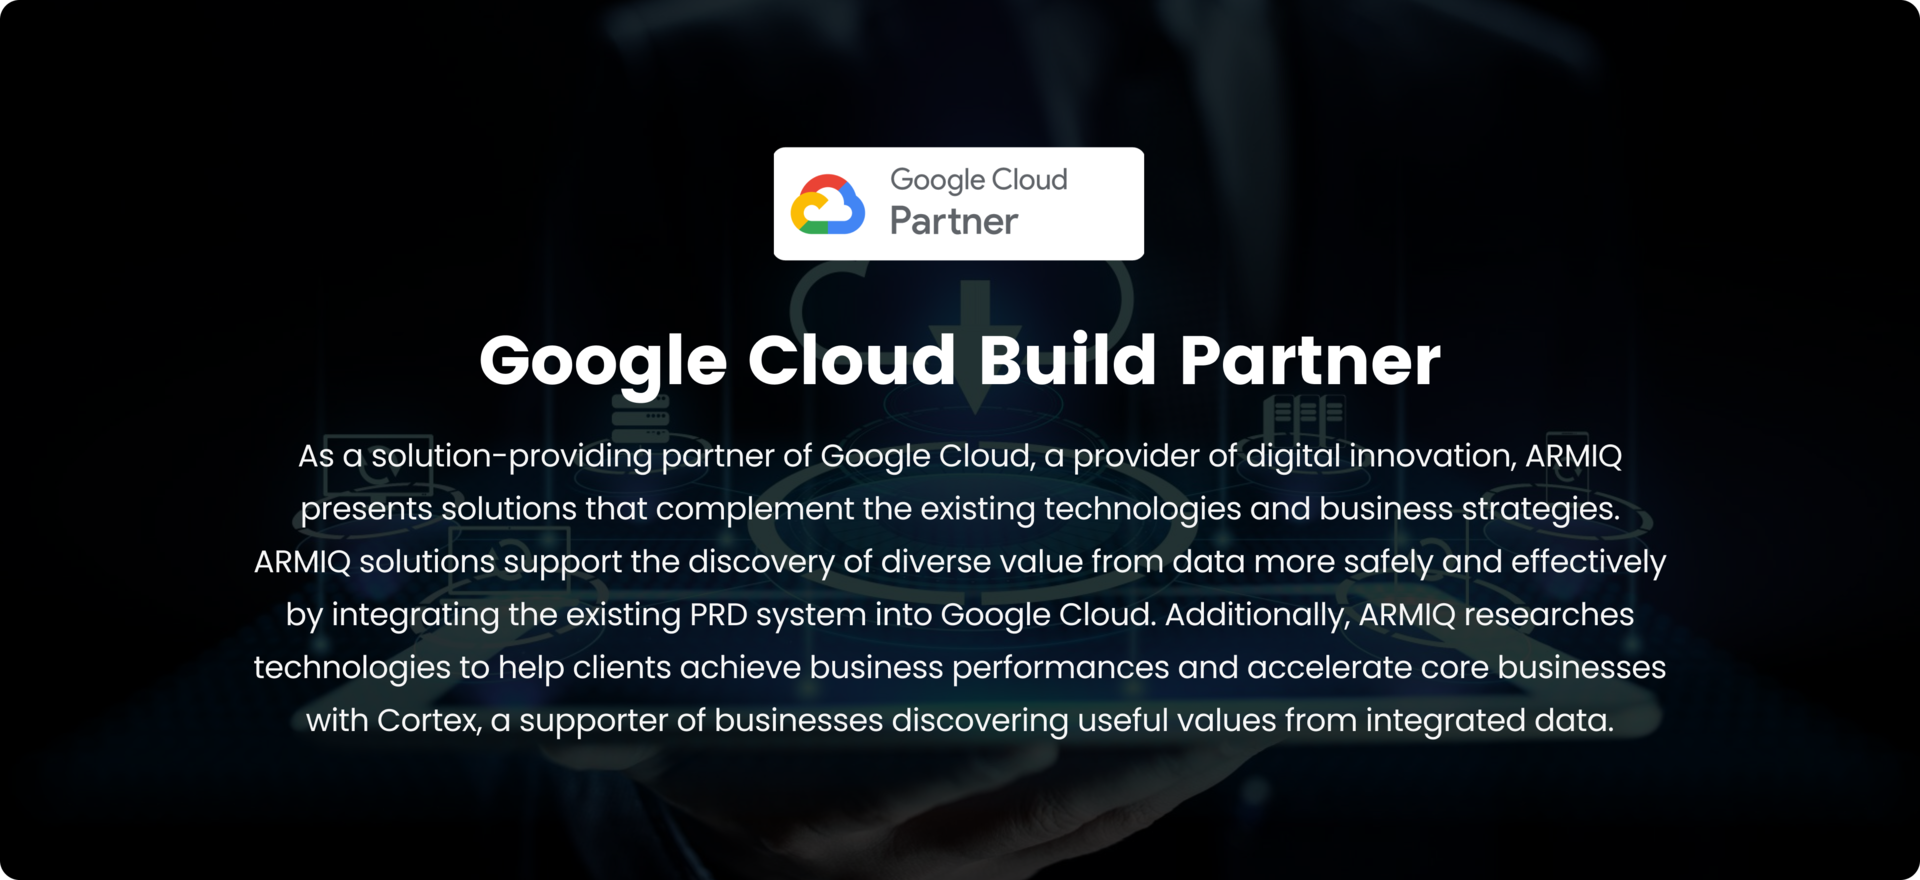 Google Cloud Build Partner, As a solution-providing partner of Google Cloud, a provider of digital innovation, ARMIQ presents solutions that complement the existing technologies and business strategies. ARMIQ solutions support the discovery of diverse value from data more safely and effectively by integrating the existing PRD system into Google Cloud. Additionally, ARMIQ researches technologies to help clients achieve business performances and accelerate core businesses with Cortex, a supporter of businesses discovering useful values from integrated data.